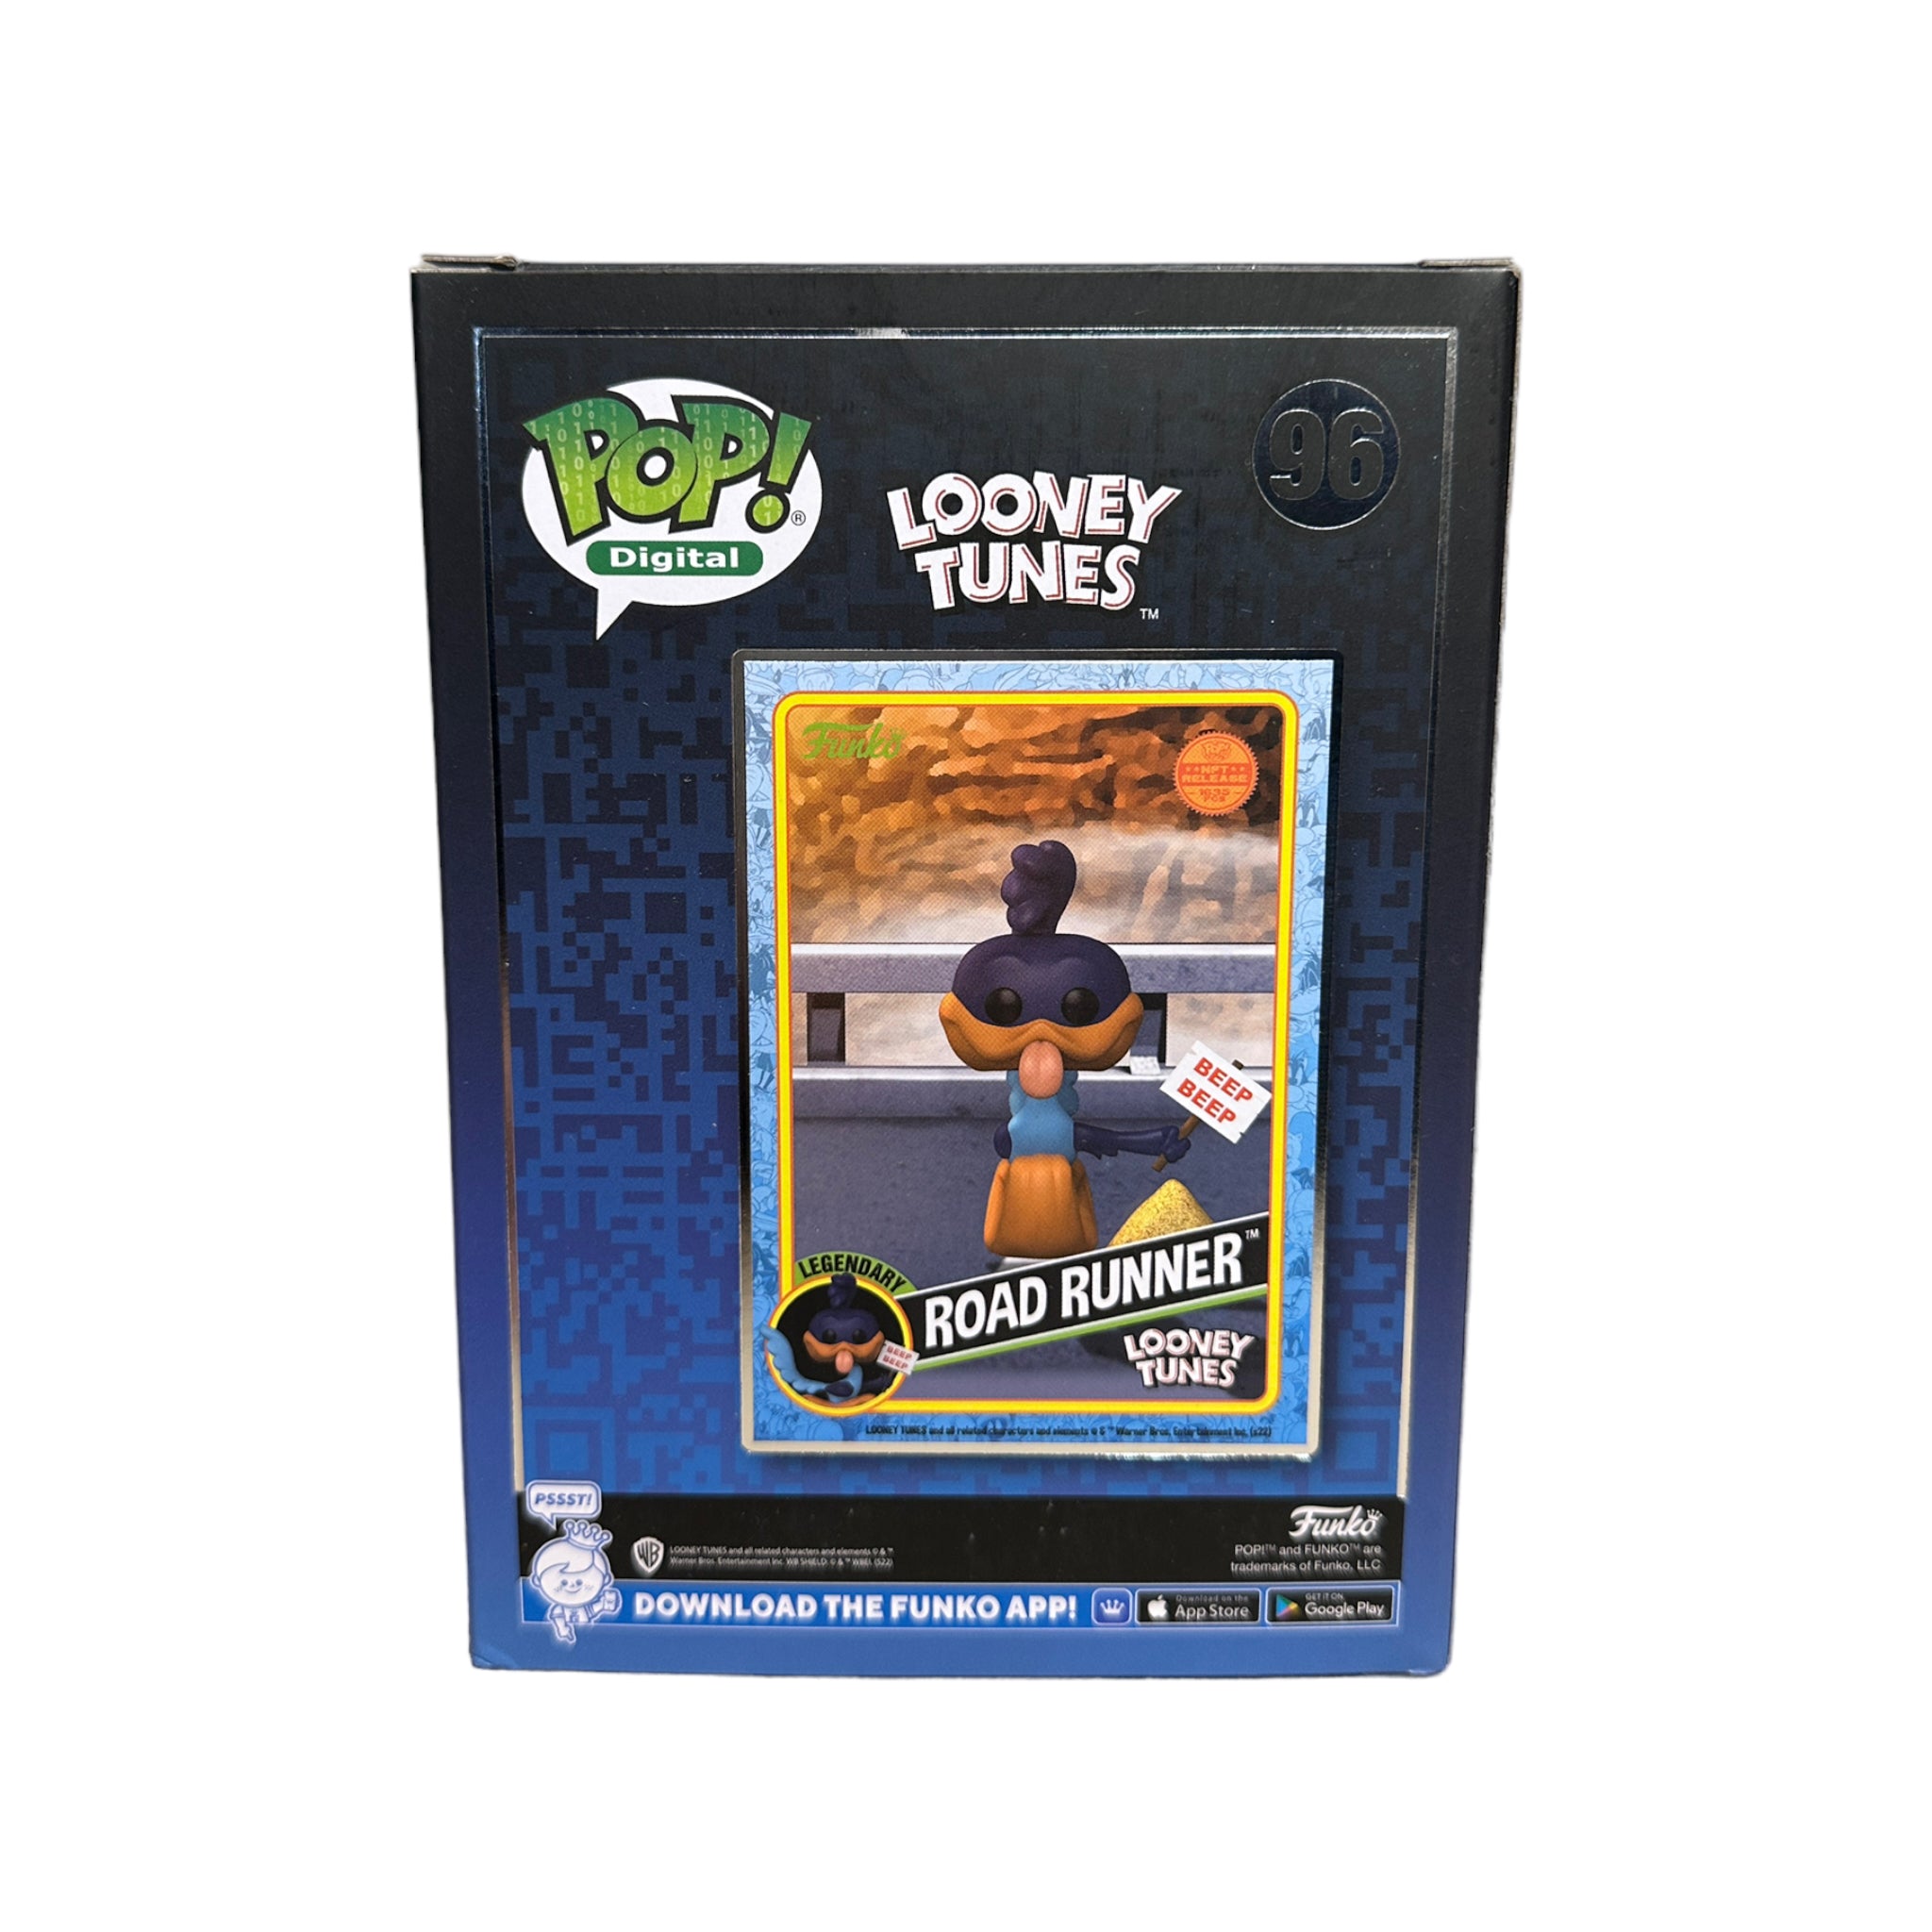 Road Runner #96 Funko Pop! - Looney Tunes - NFT Release Exclusive LE1635 Pcs - Condition 9/10